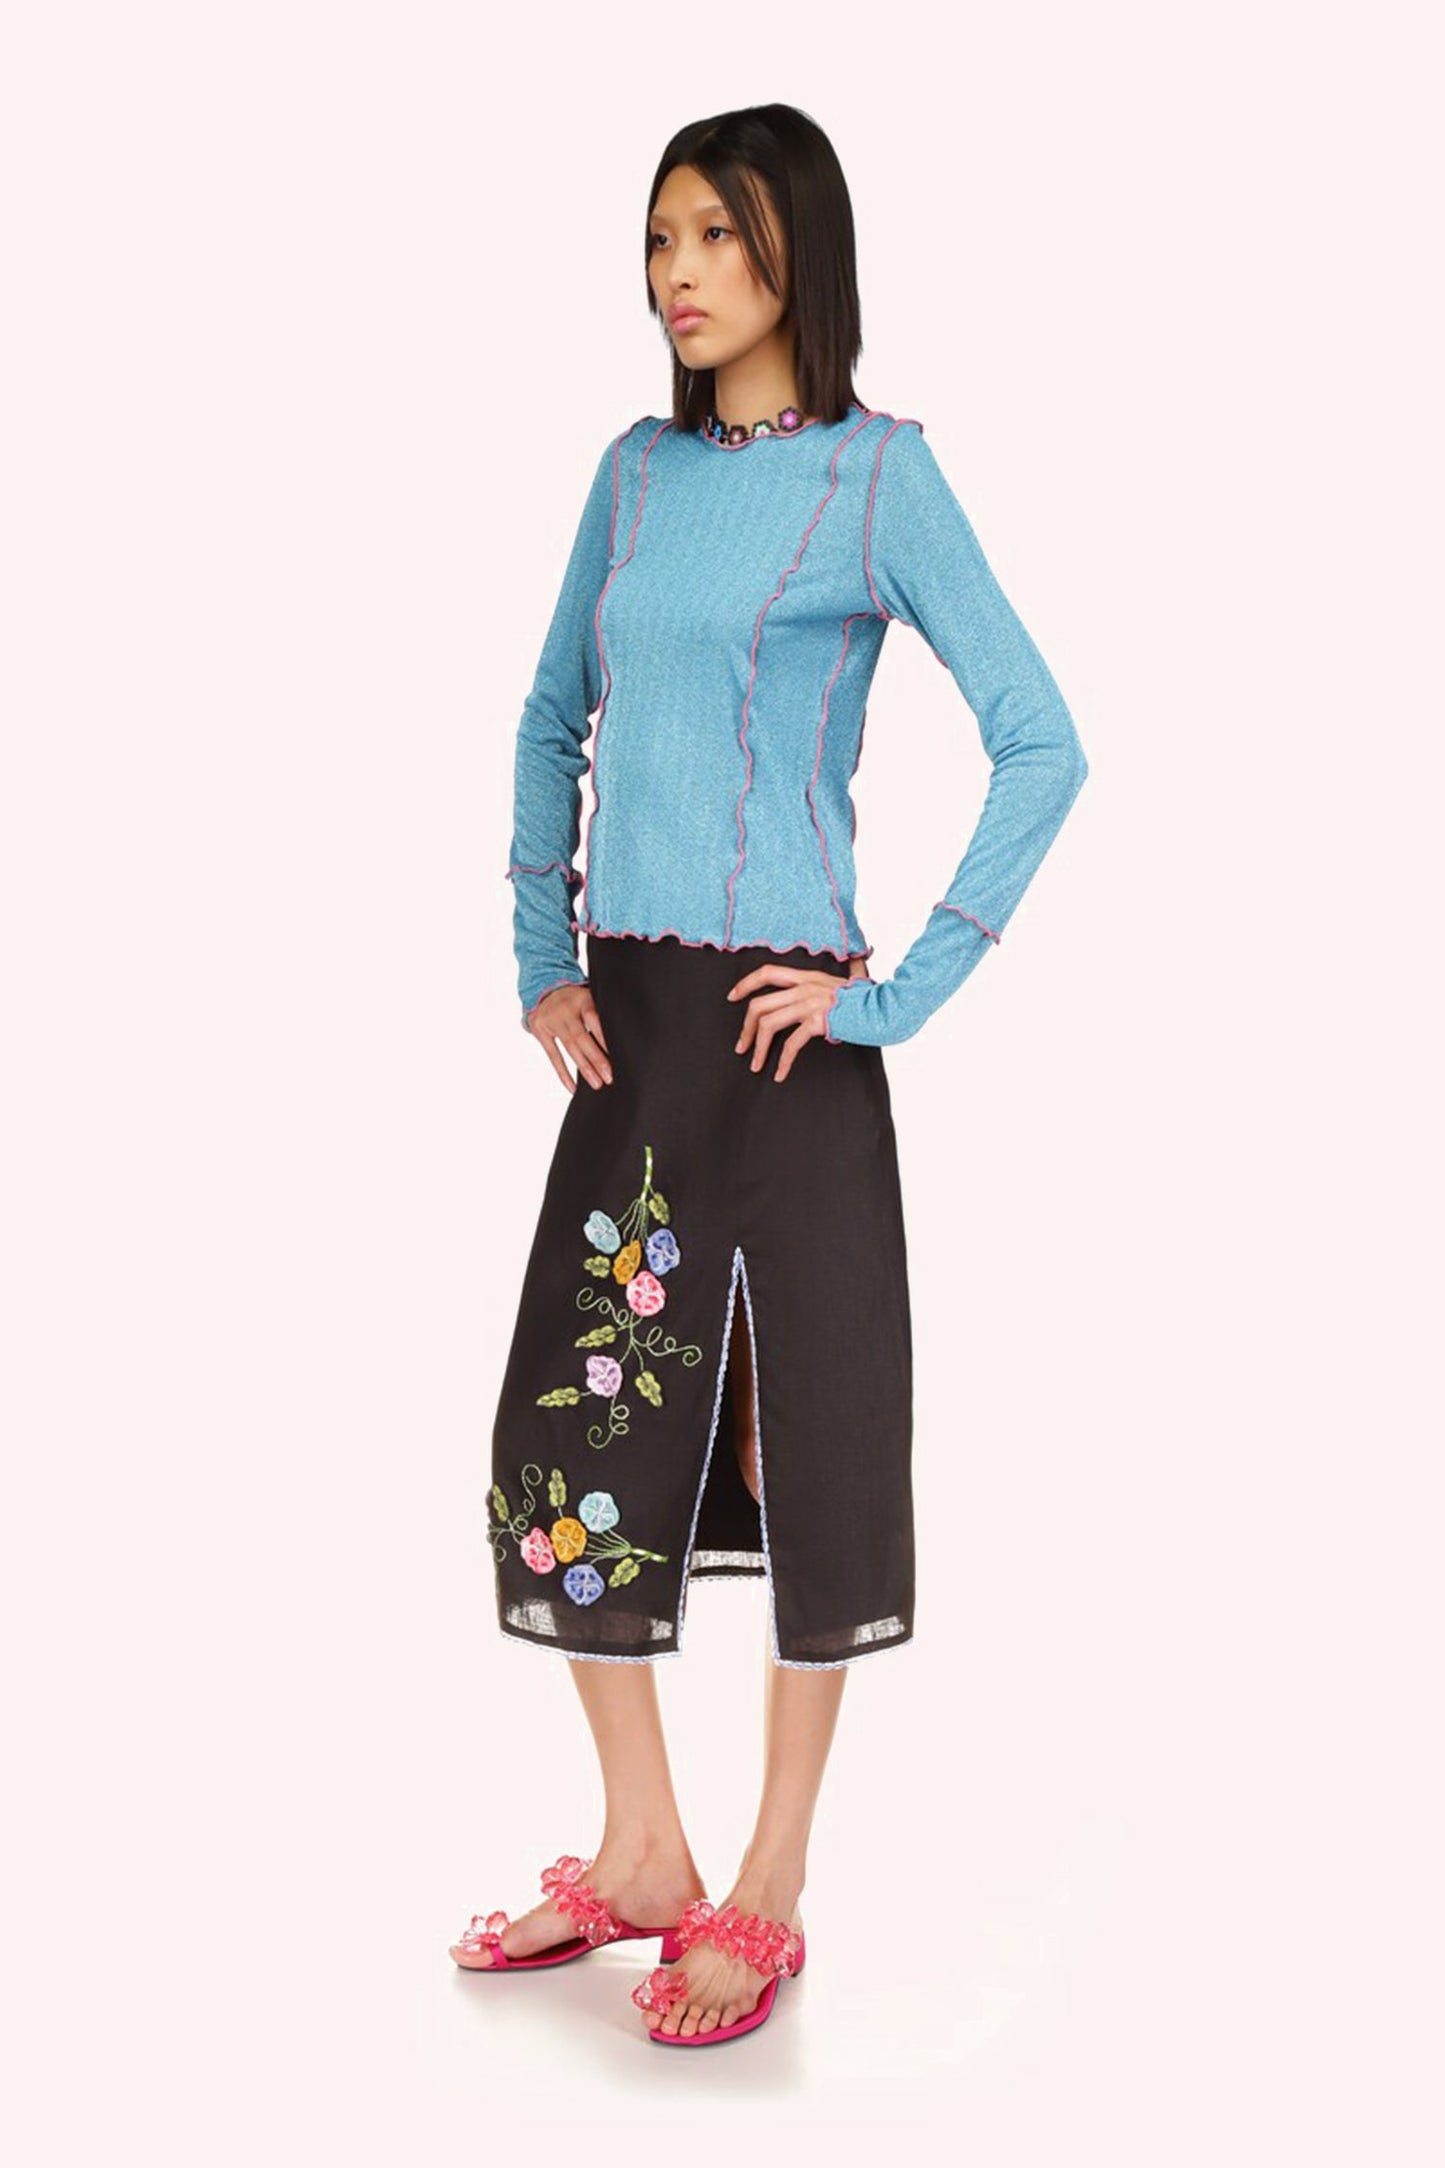 3-D Pansy Embroidered on Linen Skirt, can be wear with a tee, baby blue hem around left side slit